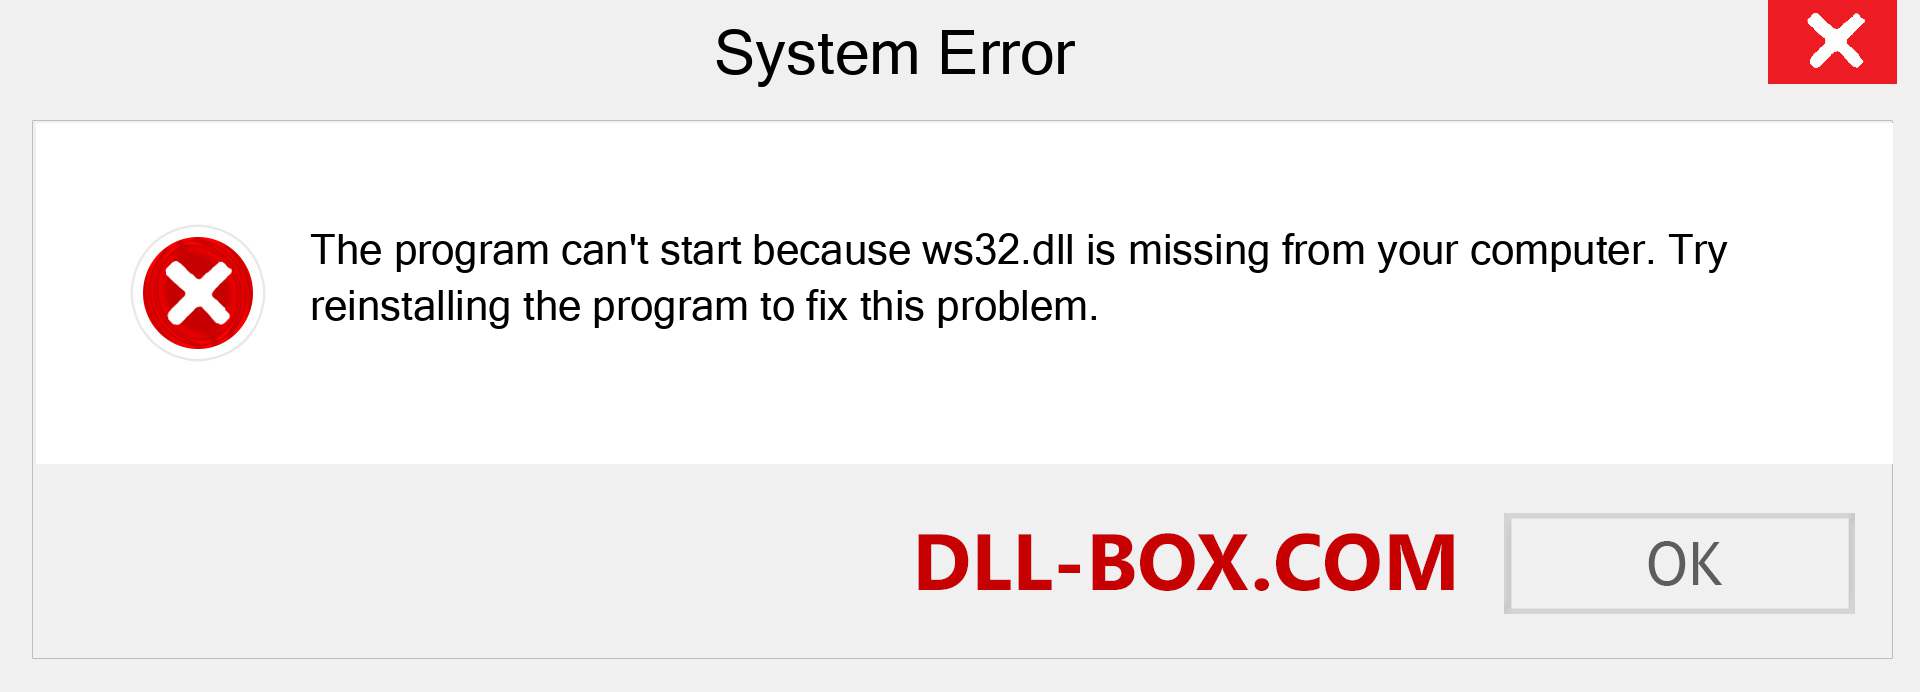  ws32.dll file is missing?. Download for Windows 7, 8, 10 - Fix  ws32 dll Missing Error on Windows, photos, images